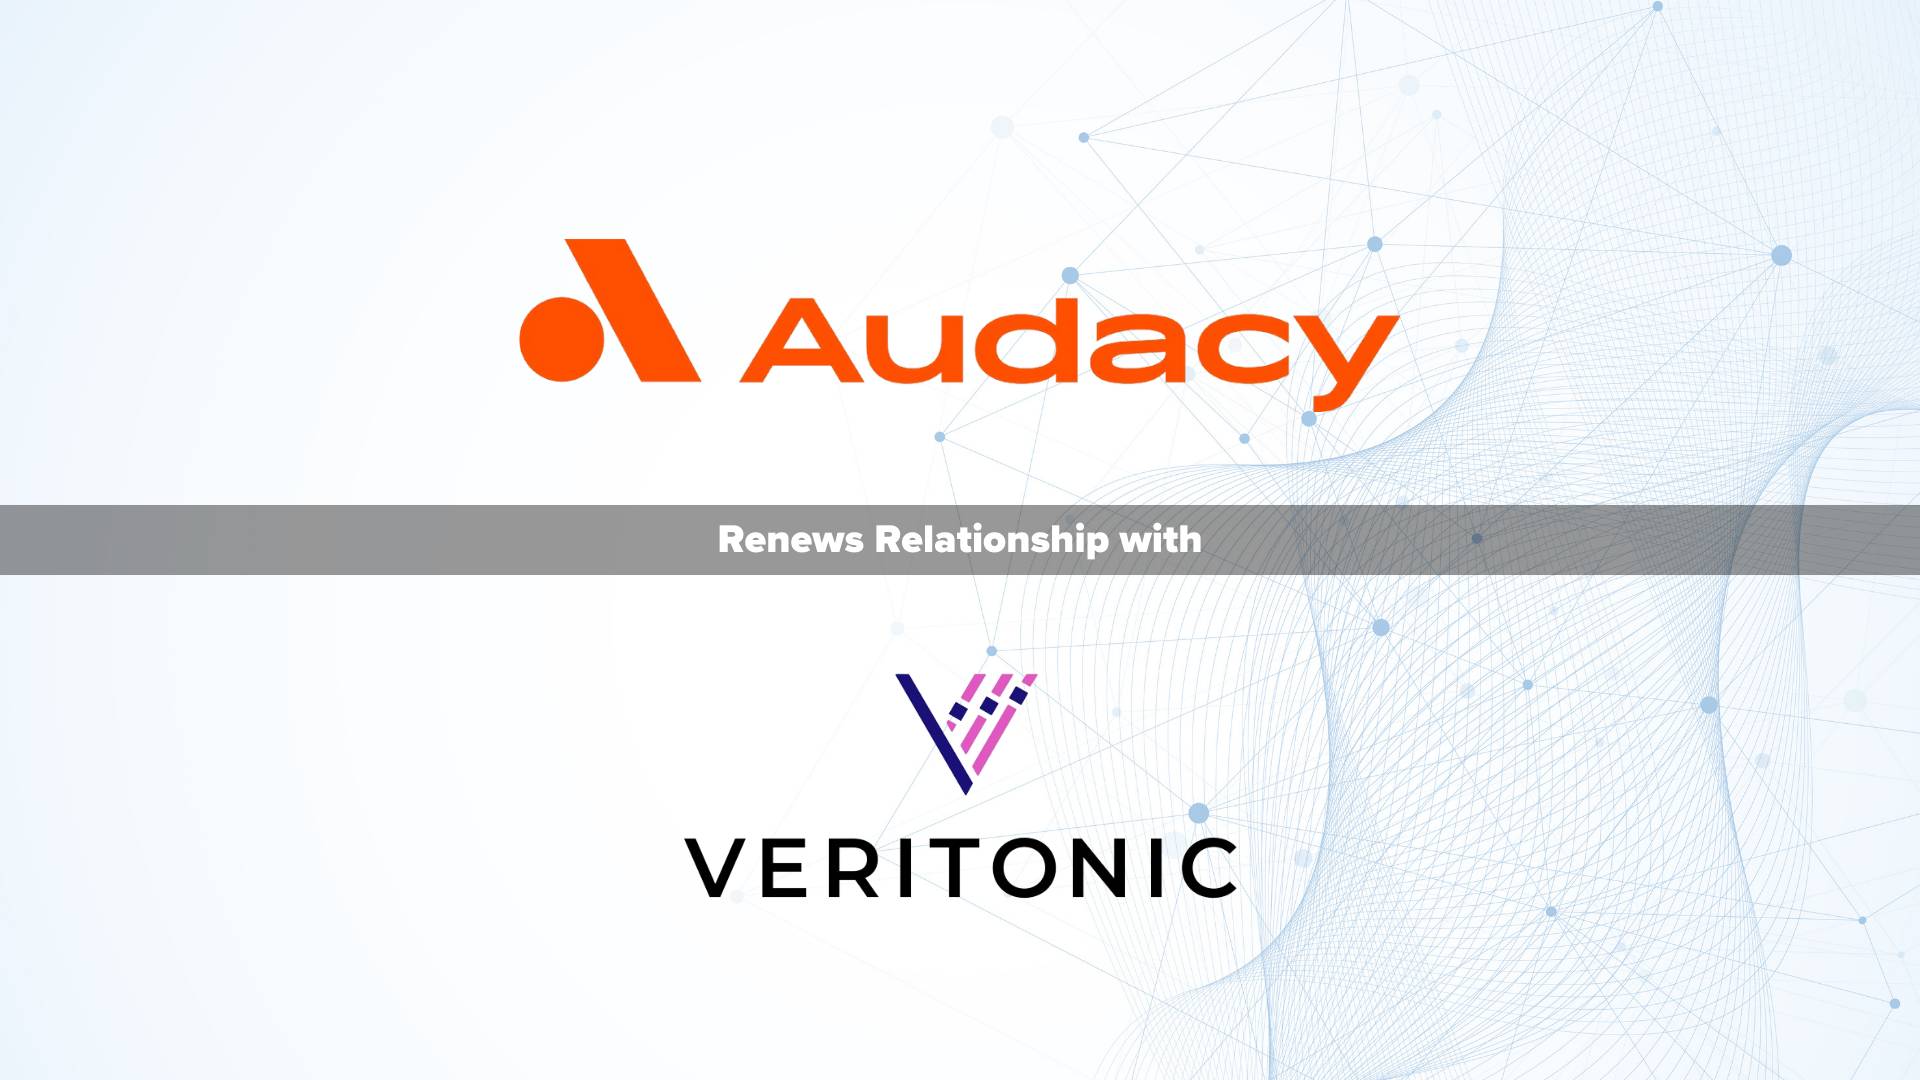 Audacy Renews Relationship with Veritonic to Provide Clients with Actionable Audio Insights through Brand Lift and Creative Measurement